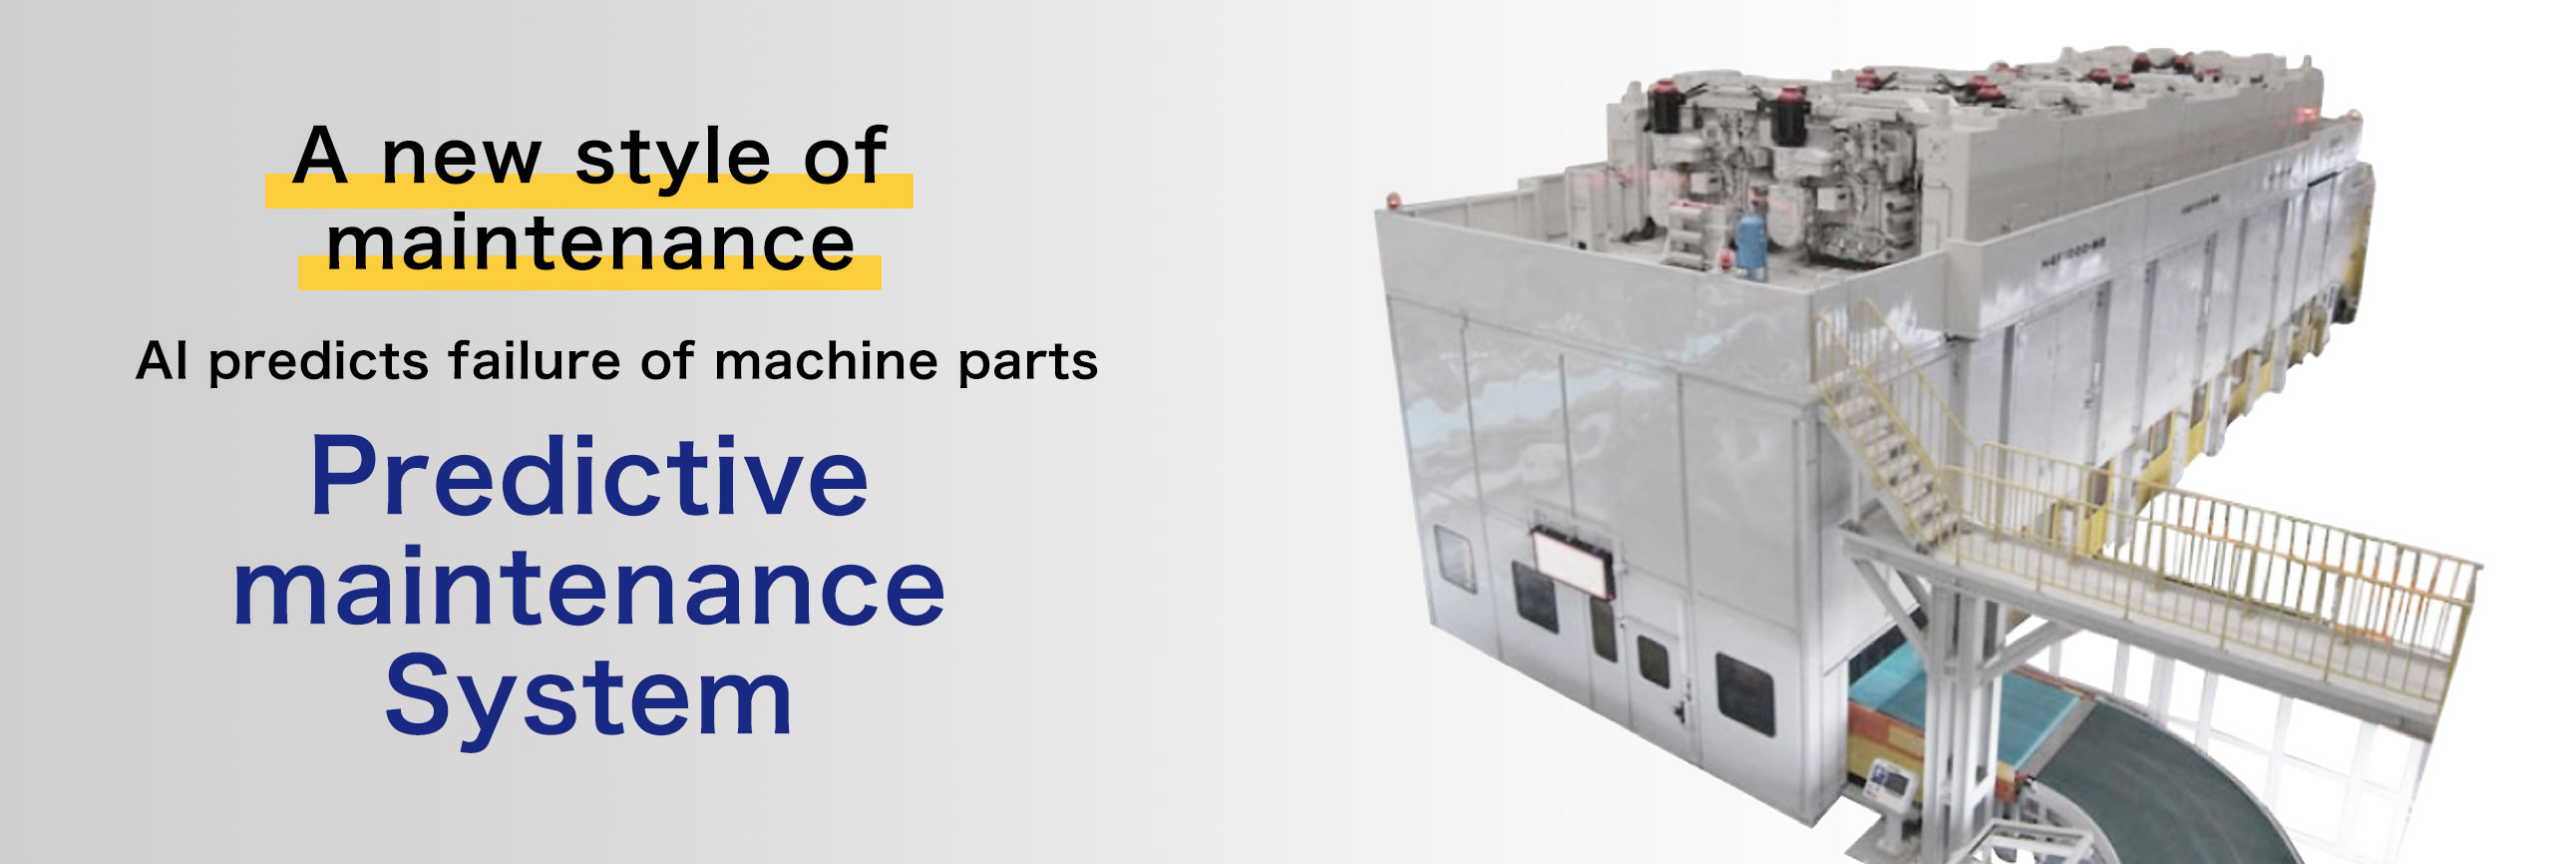 A new style of maintenance AI predicts failure of machine parts Predictive maintenance System